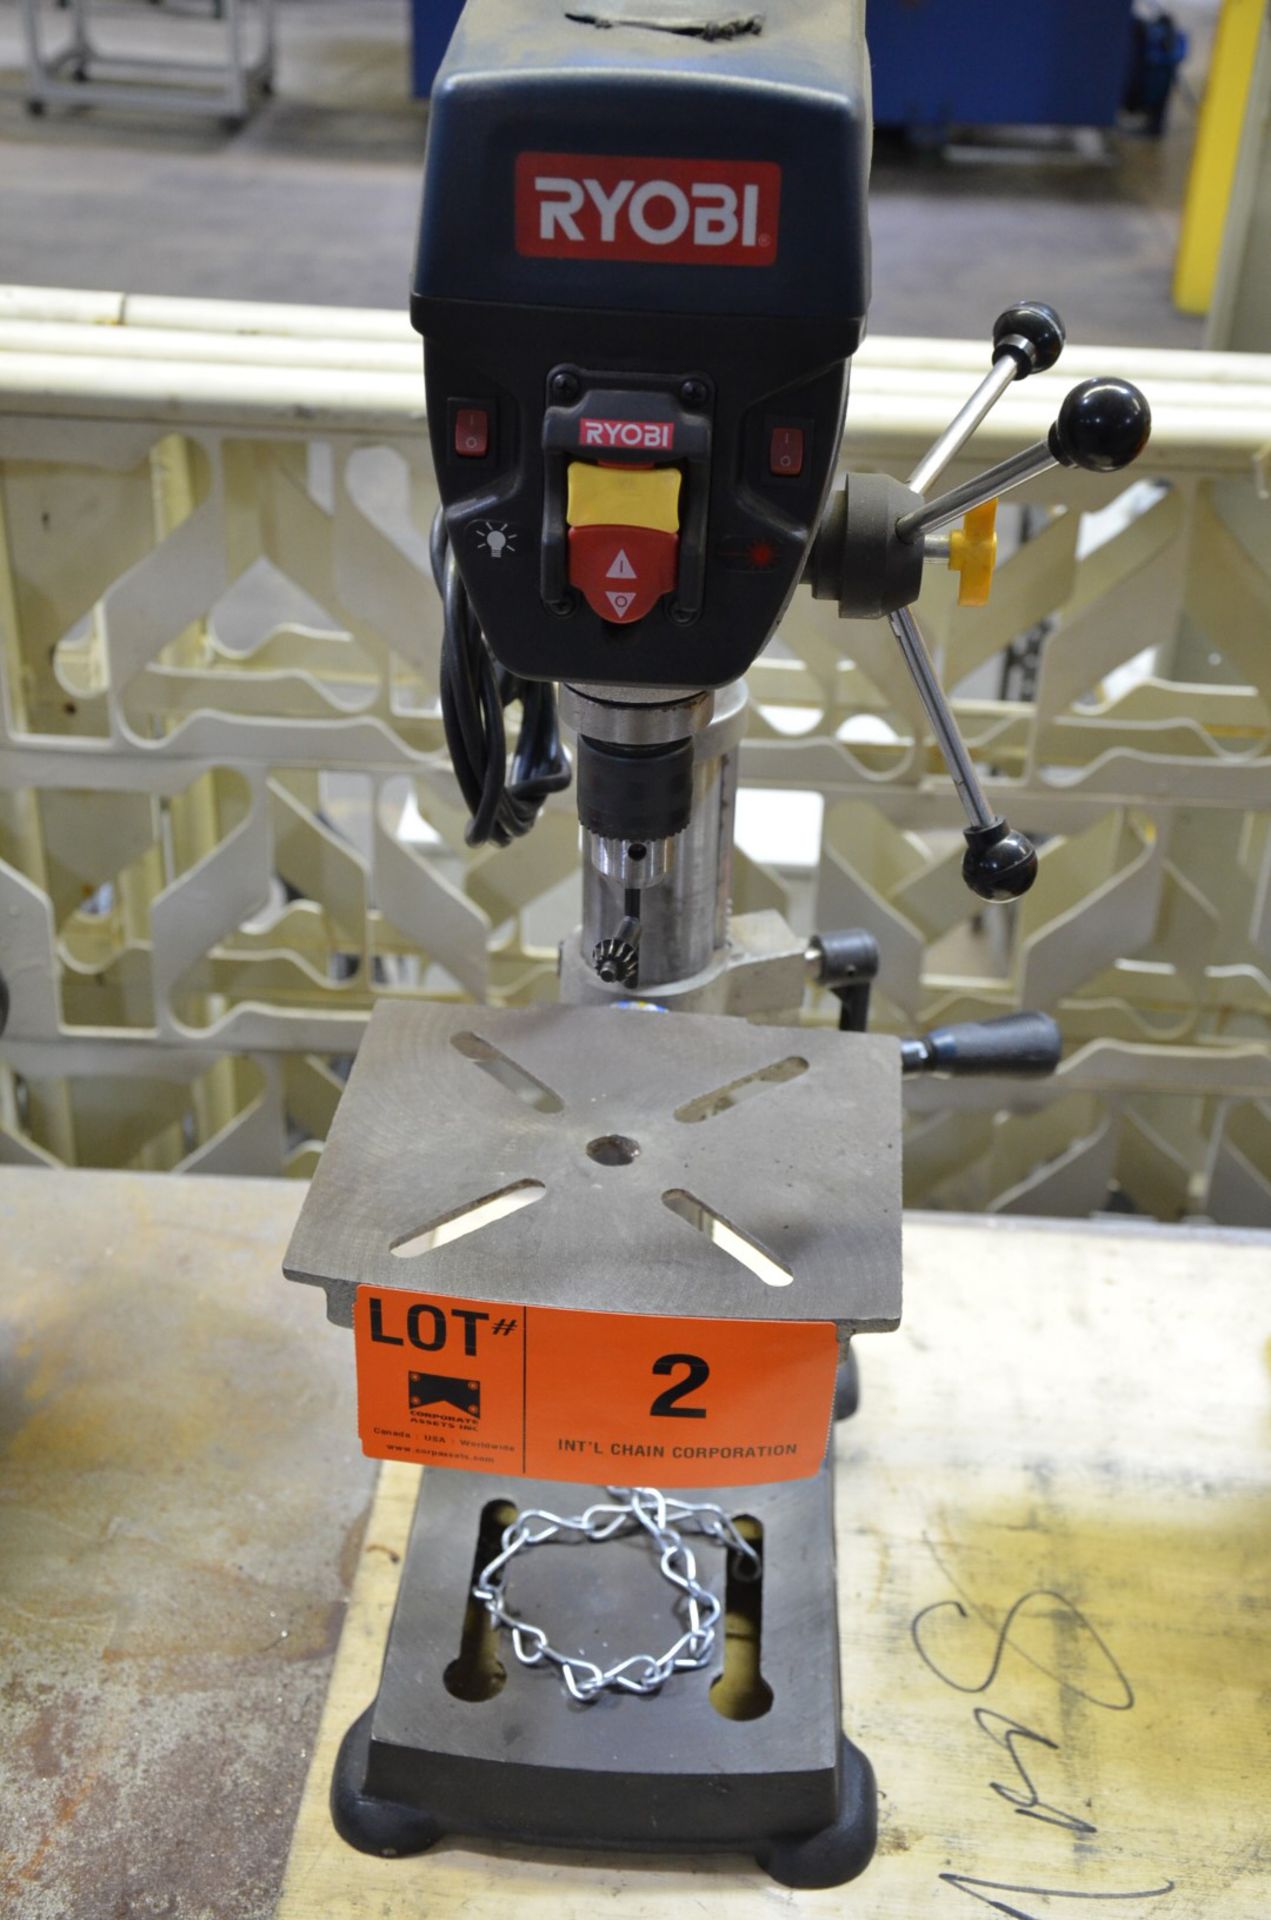 RYOBI DP102L 10" BENCH-TYPE DRILL PRESS WITH 9"X7.5" TABLE, 570 RPM, LASER SIGHT, S/N: AZ-1304- - Image 3 of 5